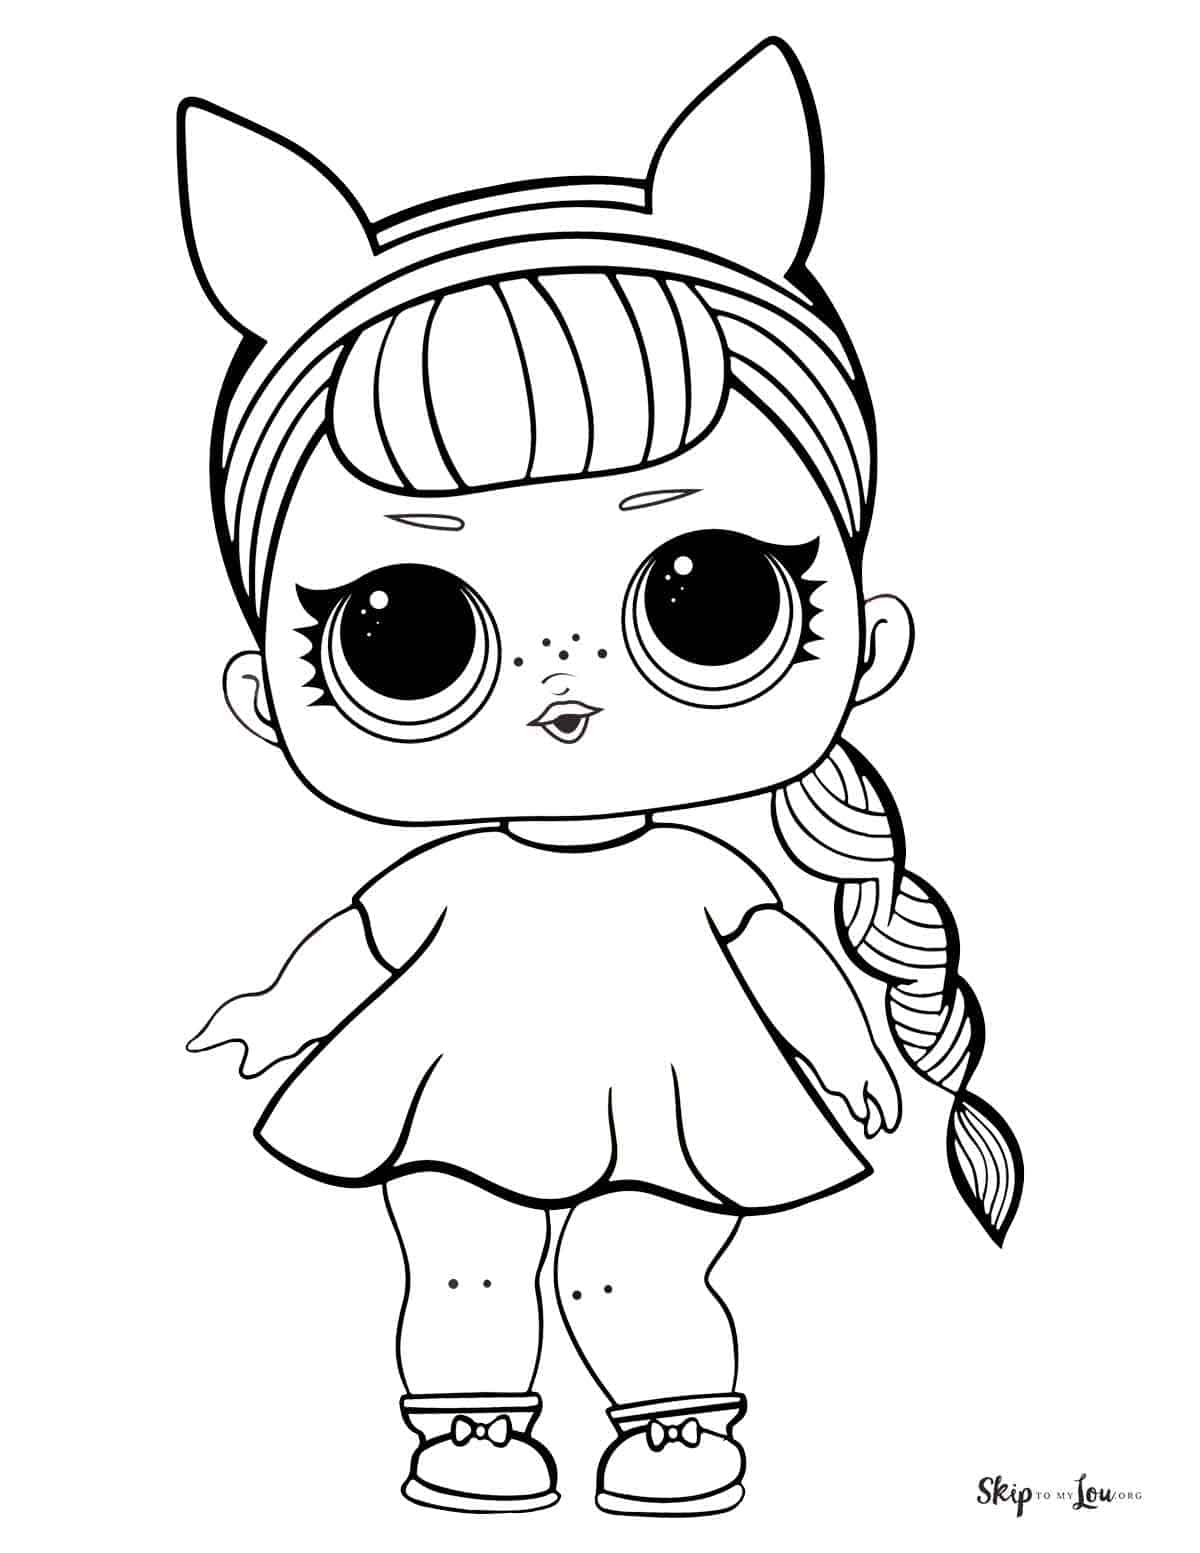 LOL Coloring Pages FREE Printable 134